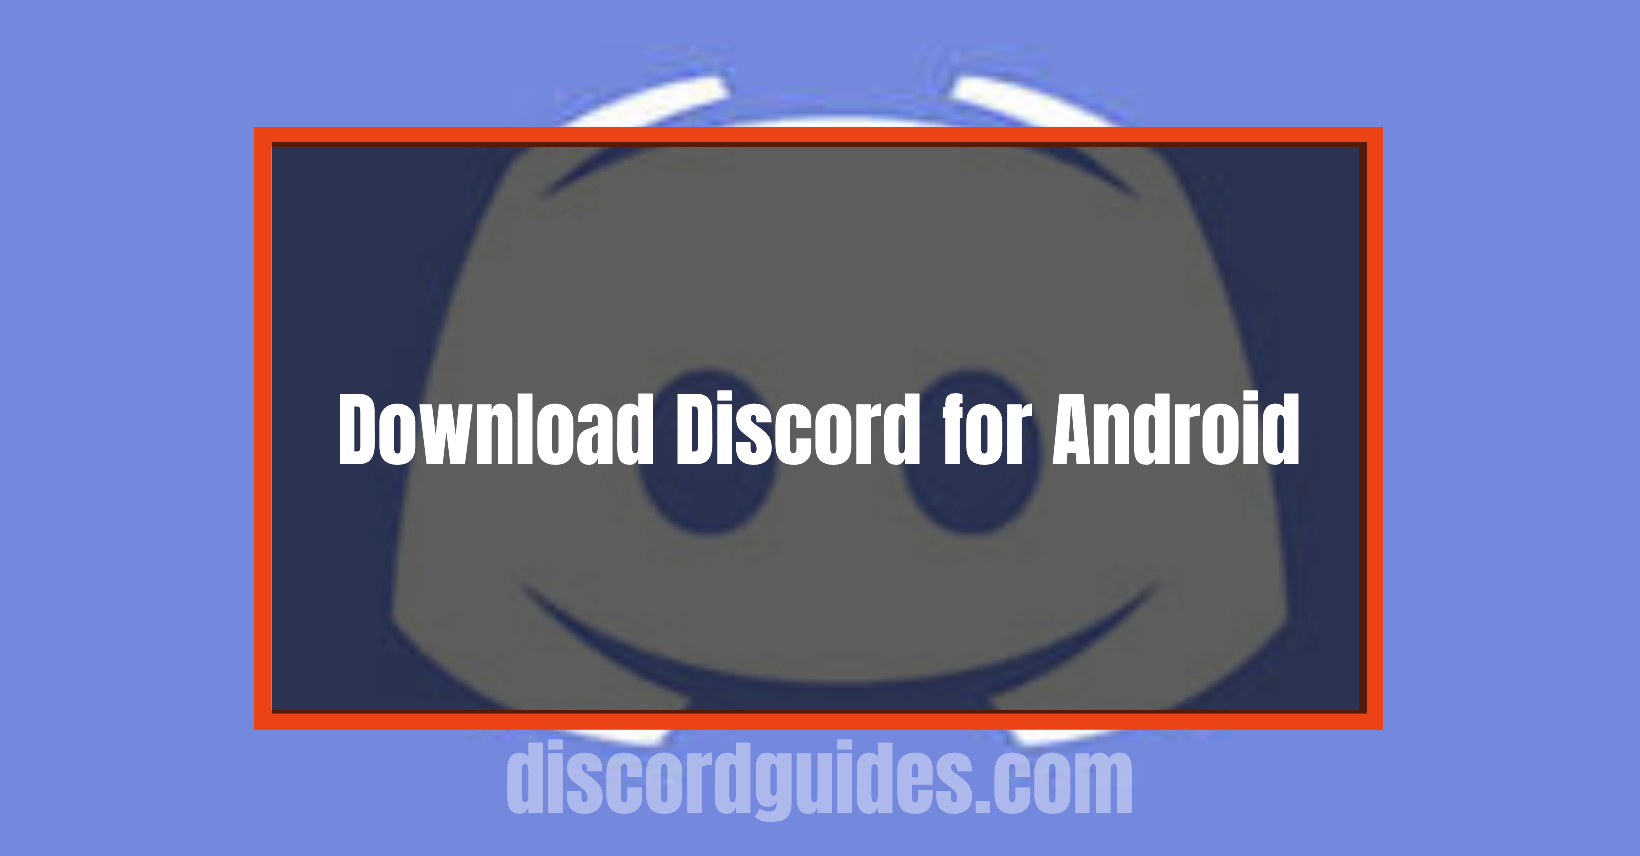 Discord for Android Free Download & Install to Talk, Chat and Hang Out!